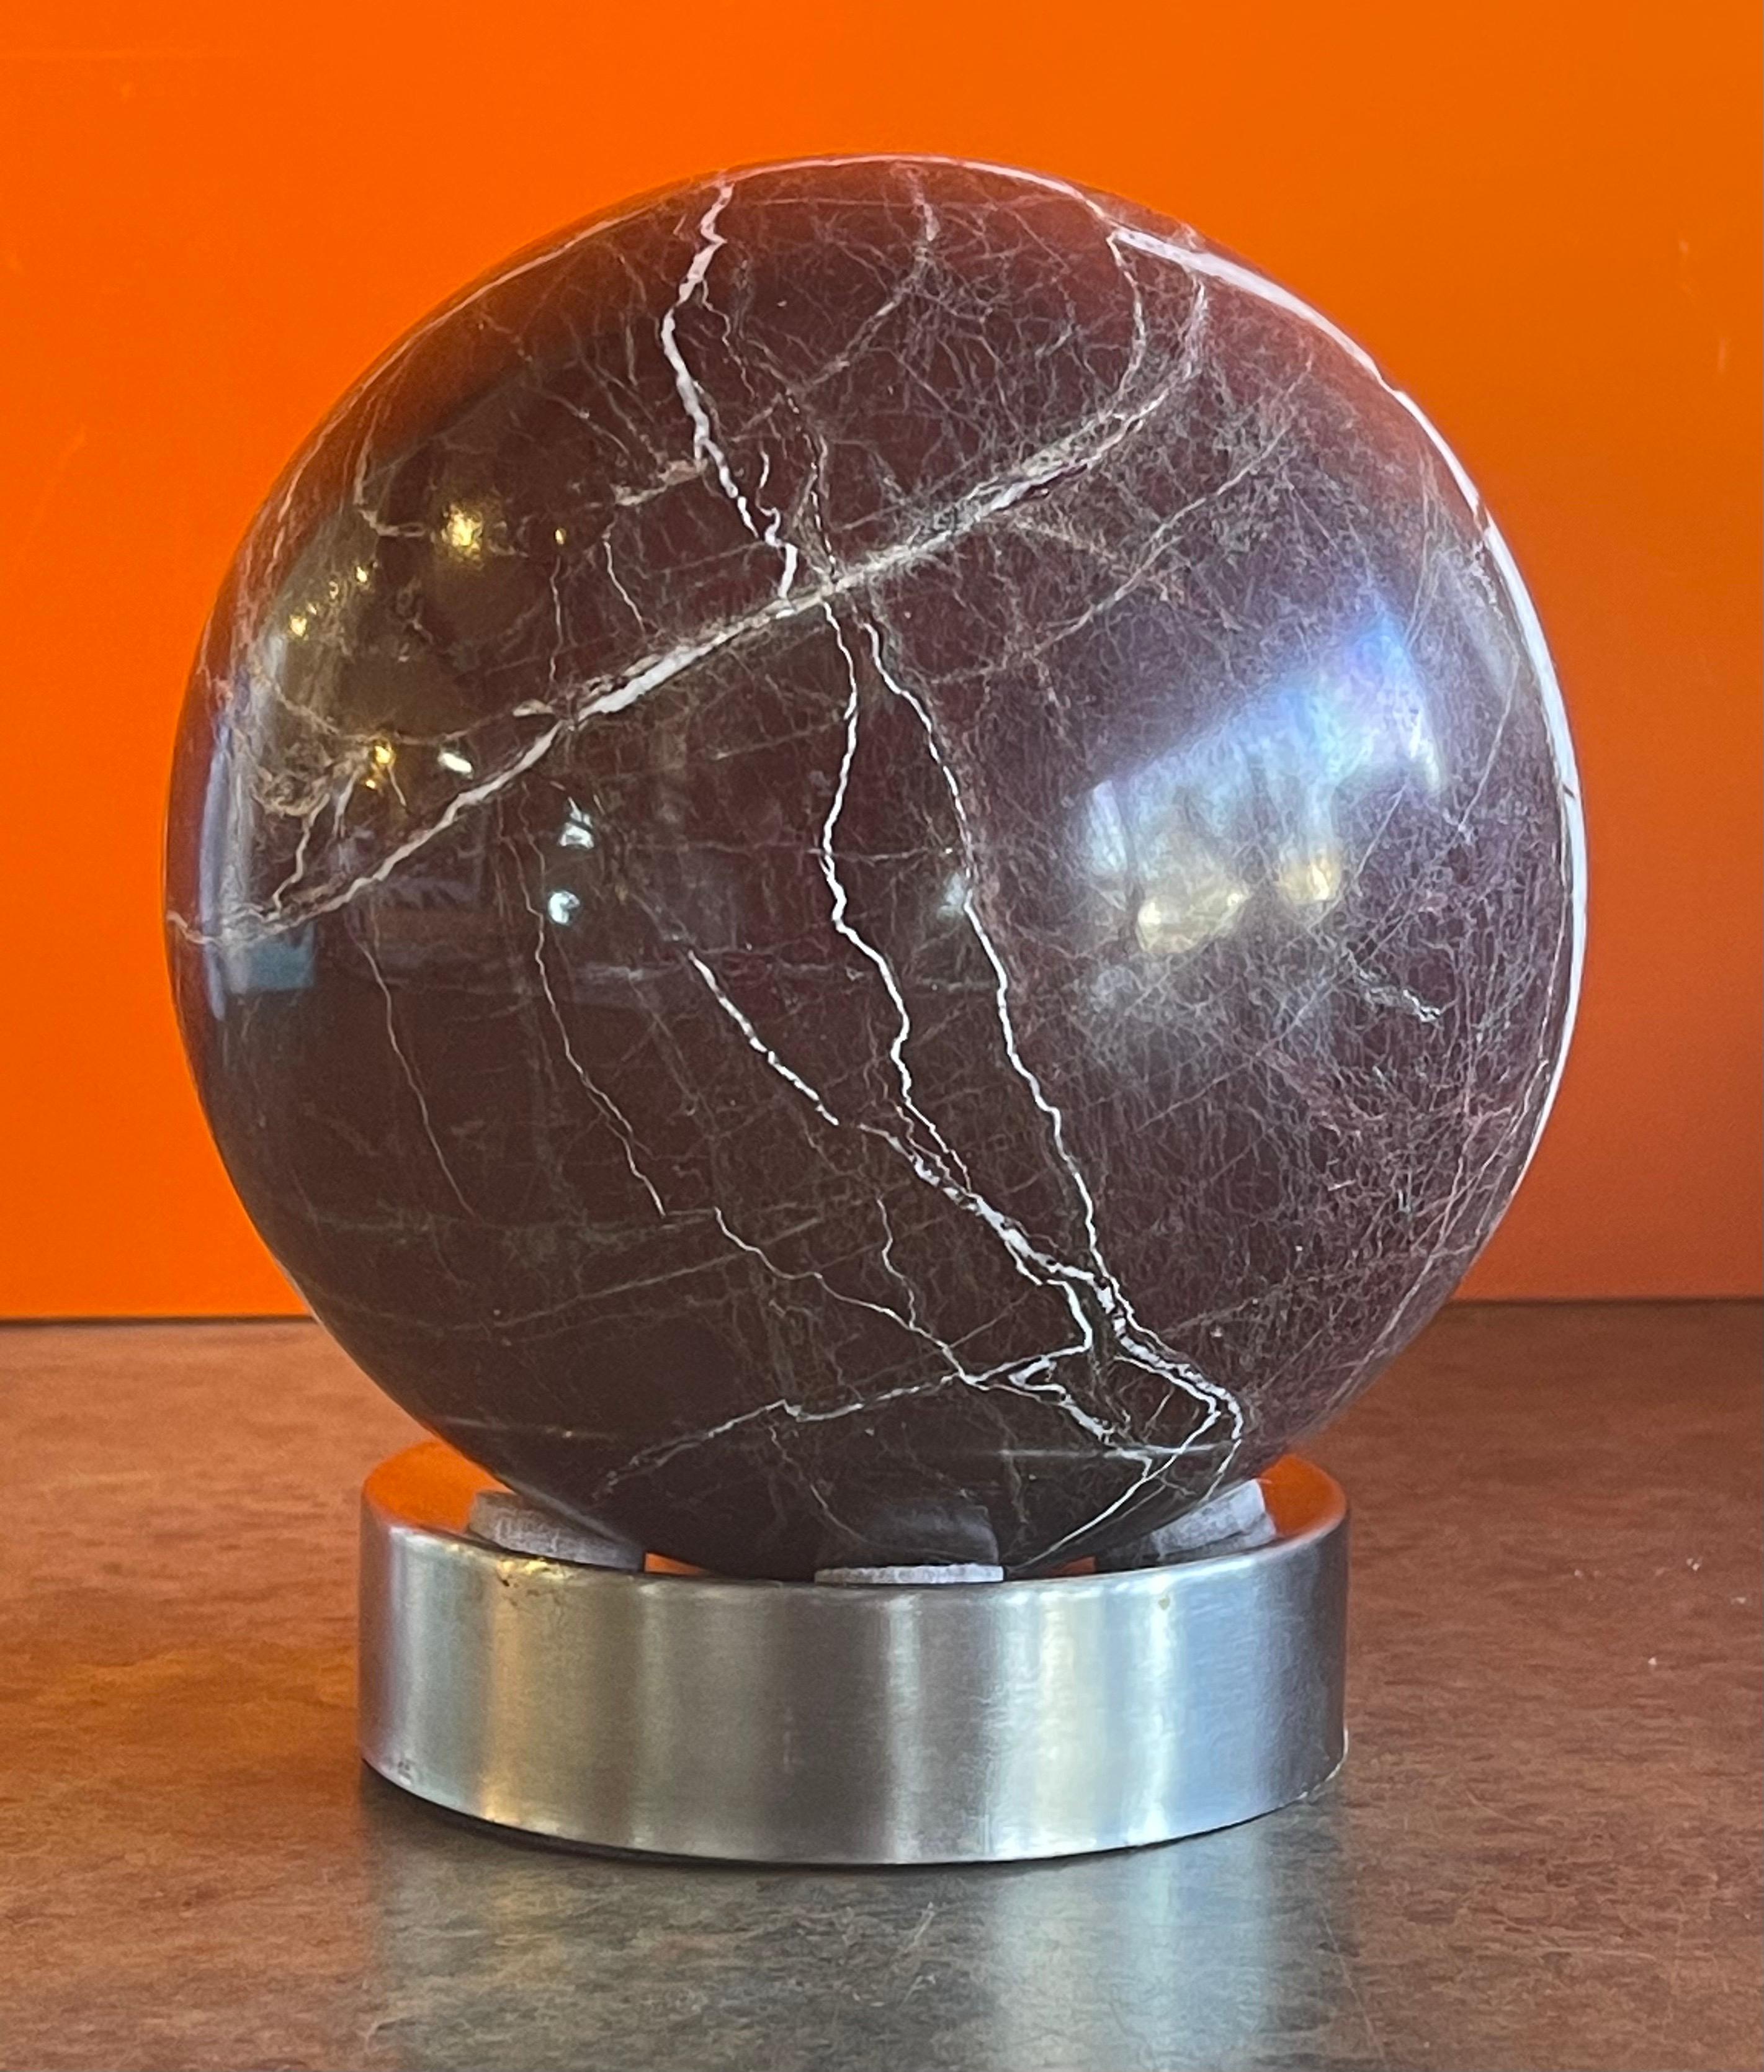 Beautiful solid brown marble decorative sphere on chrome base, circa 1970s. The piece is in very good condition with no chips or cracks; it has a nice polished finish with white veining. The sphere measures 6